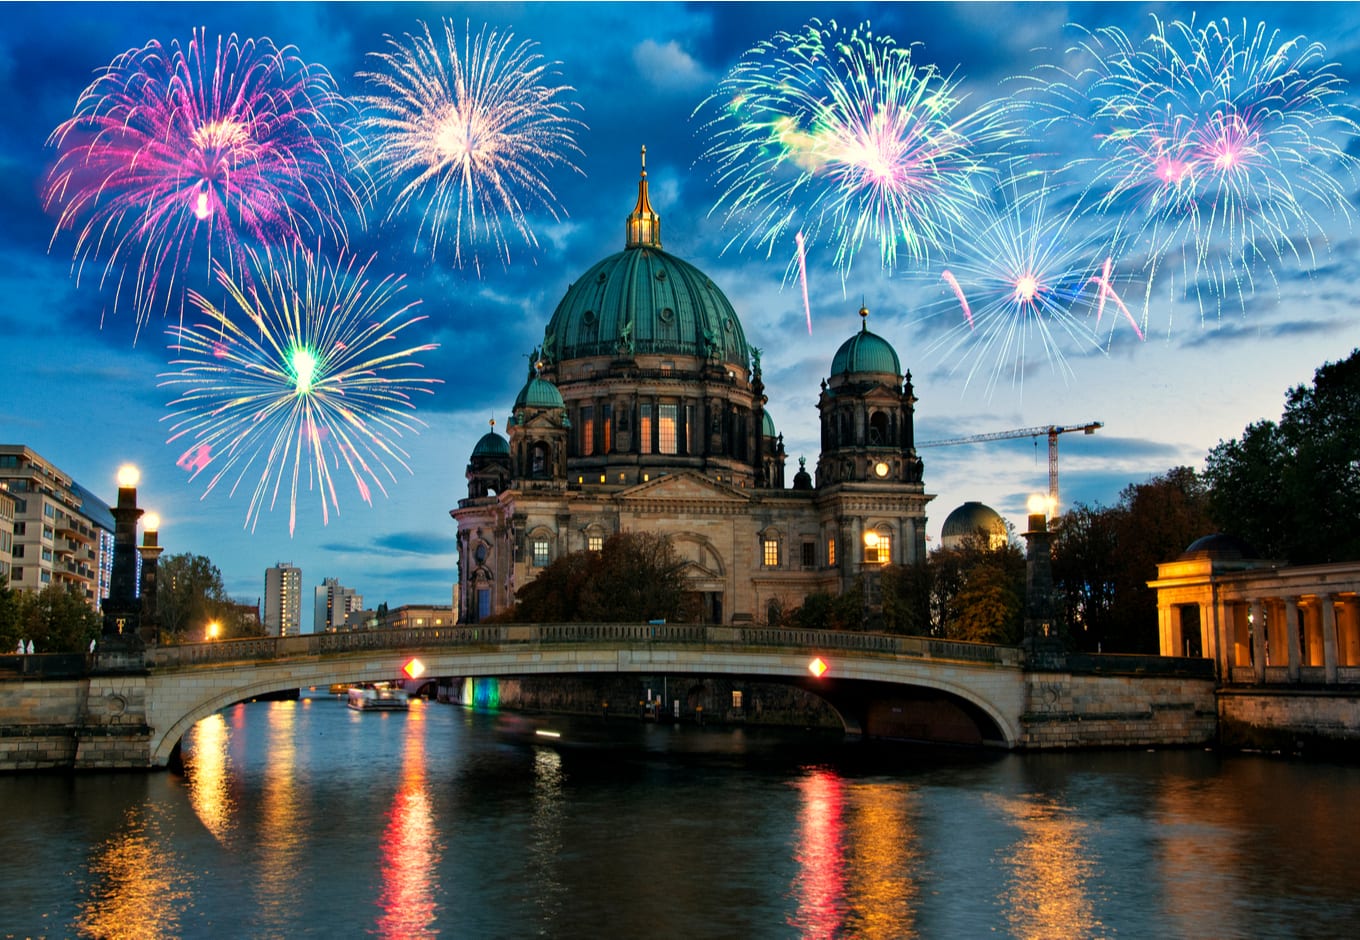 Fireworks over Berliner Cathedral in Berlin, Germany.
